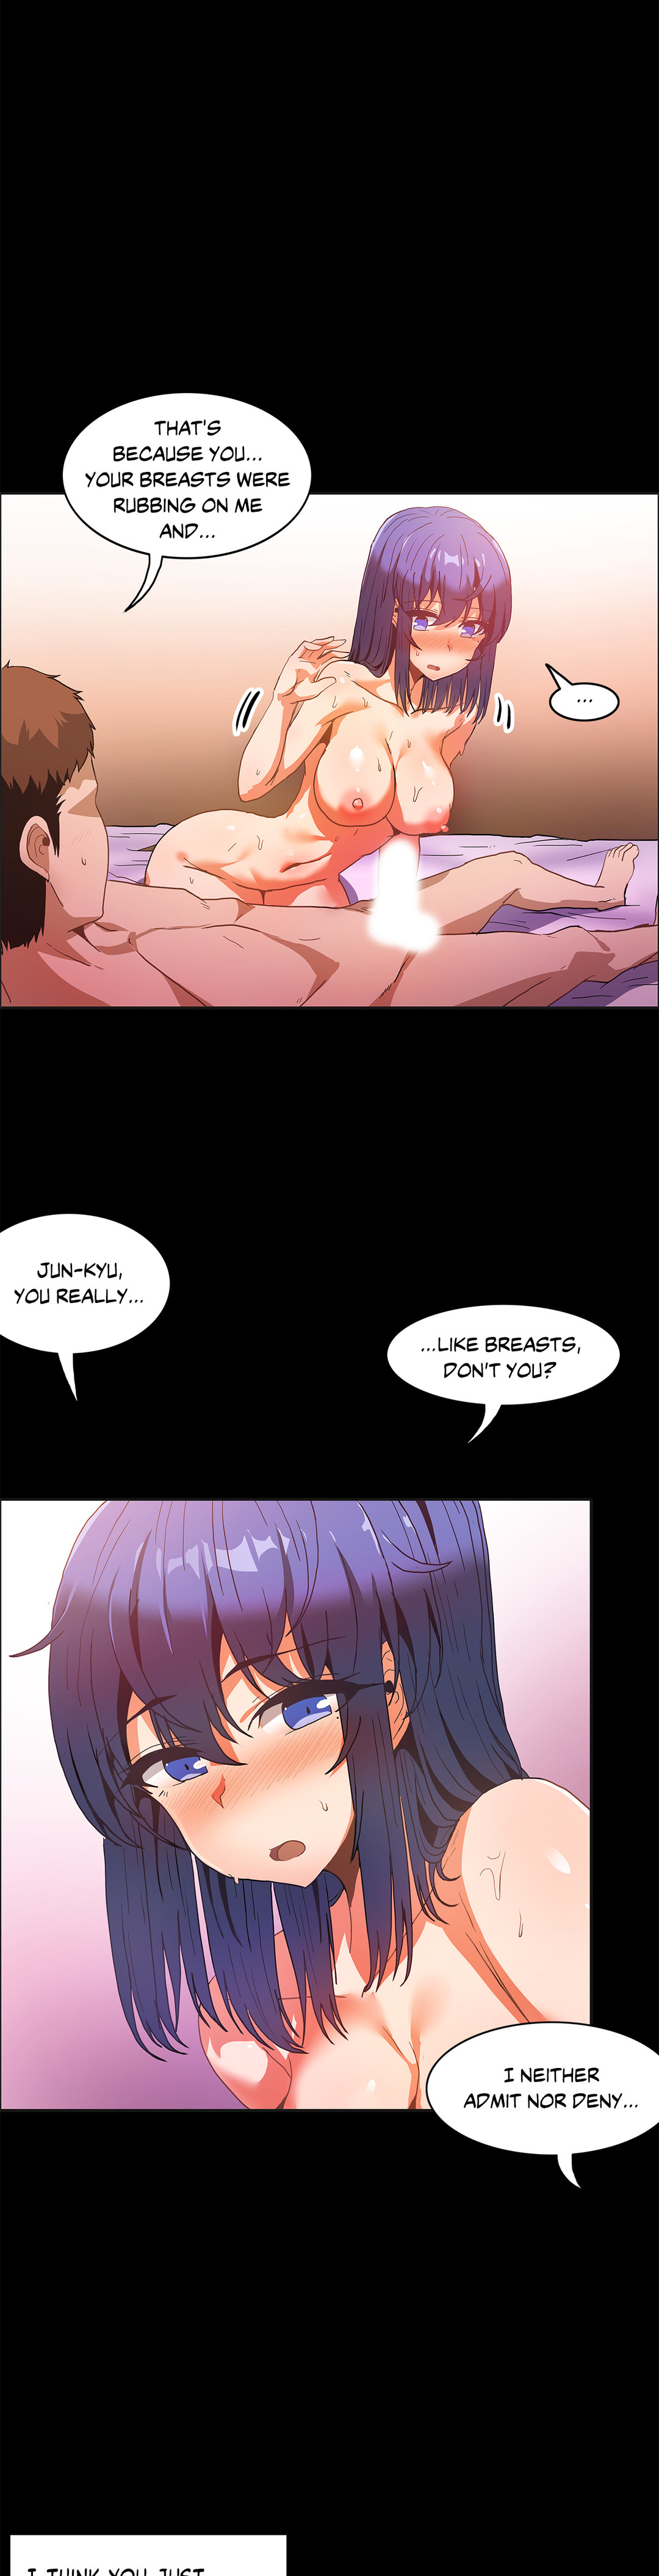 The Girl That Wet the Wall Ch 51 - 55 page 8 full